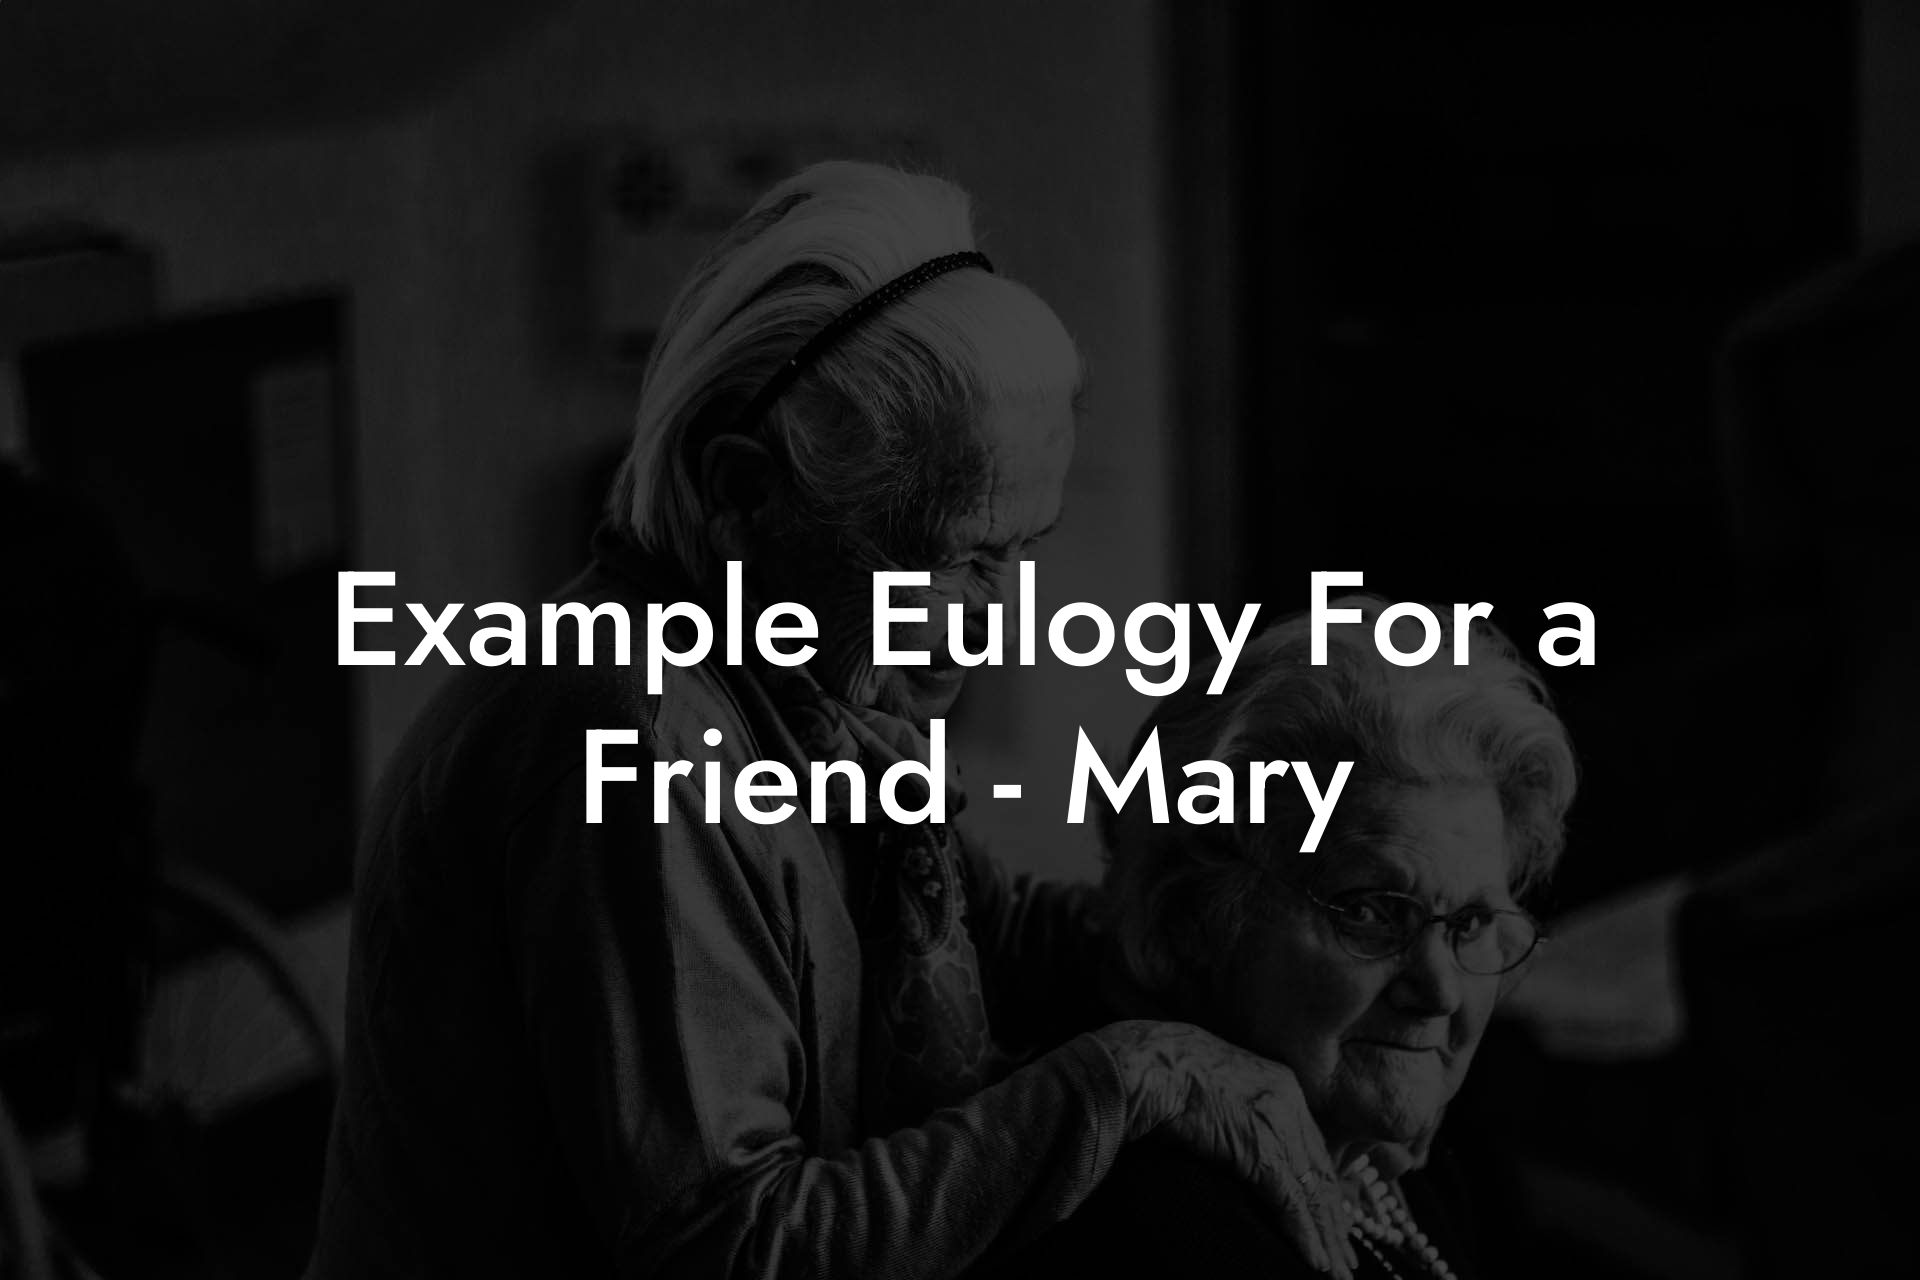 Example Eulogy For a Friend - Mary